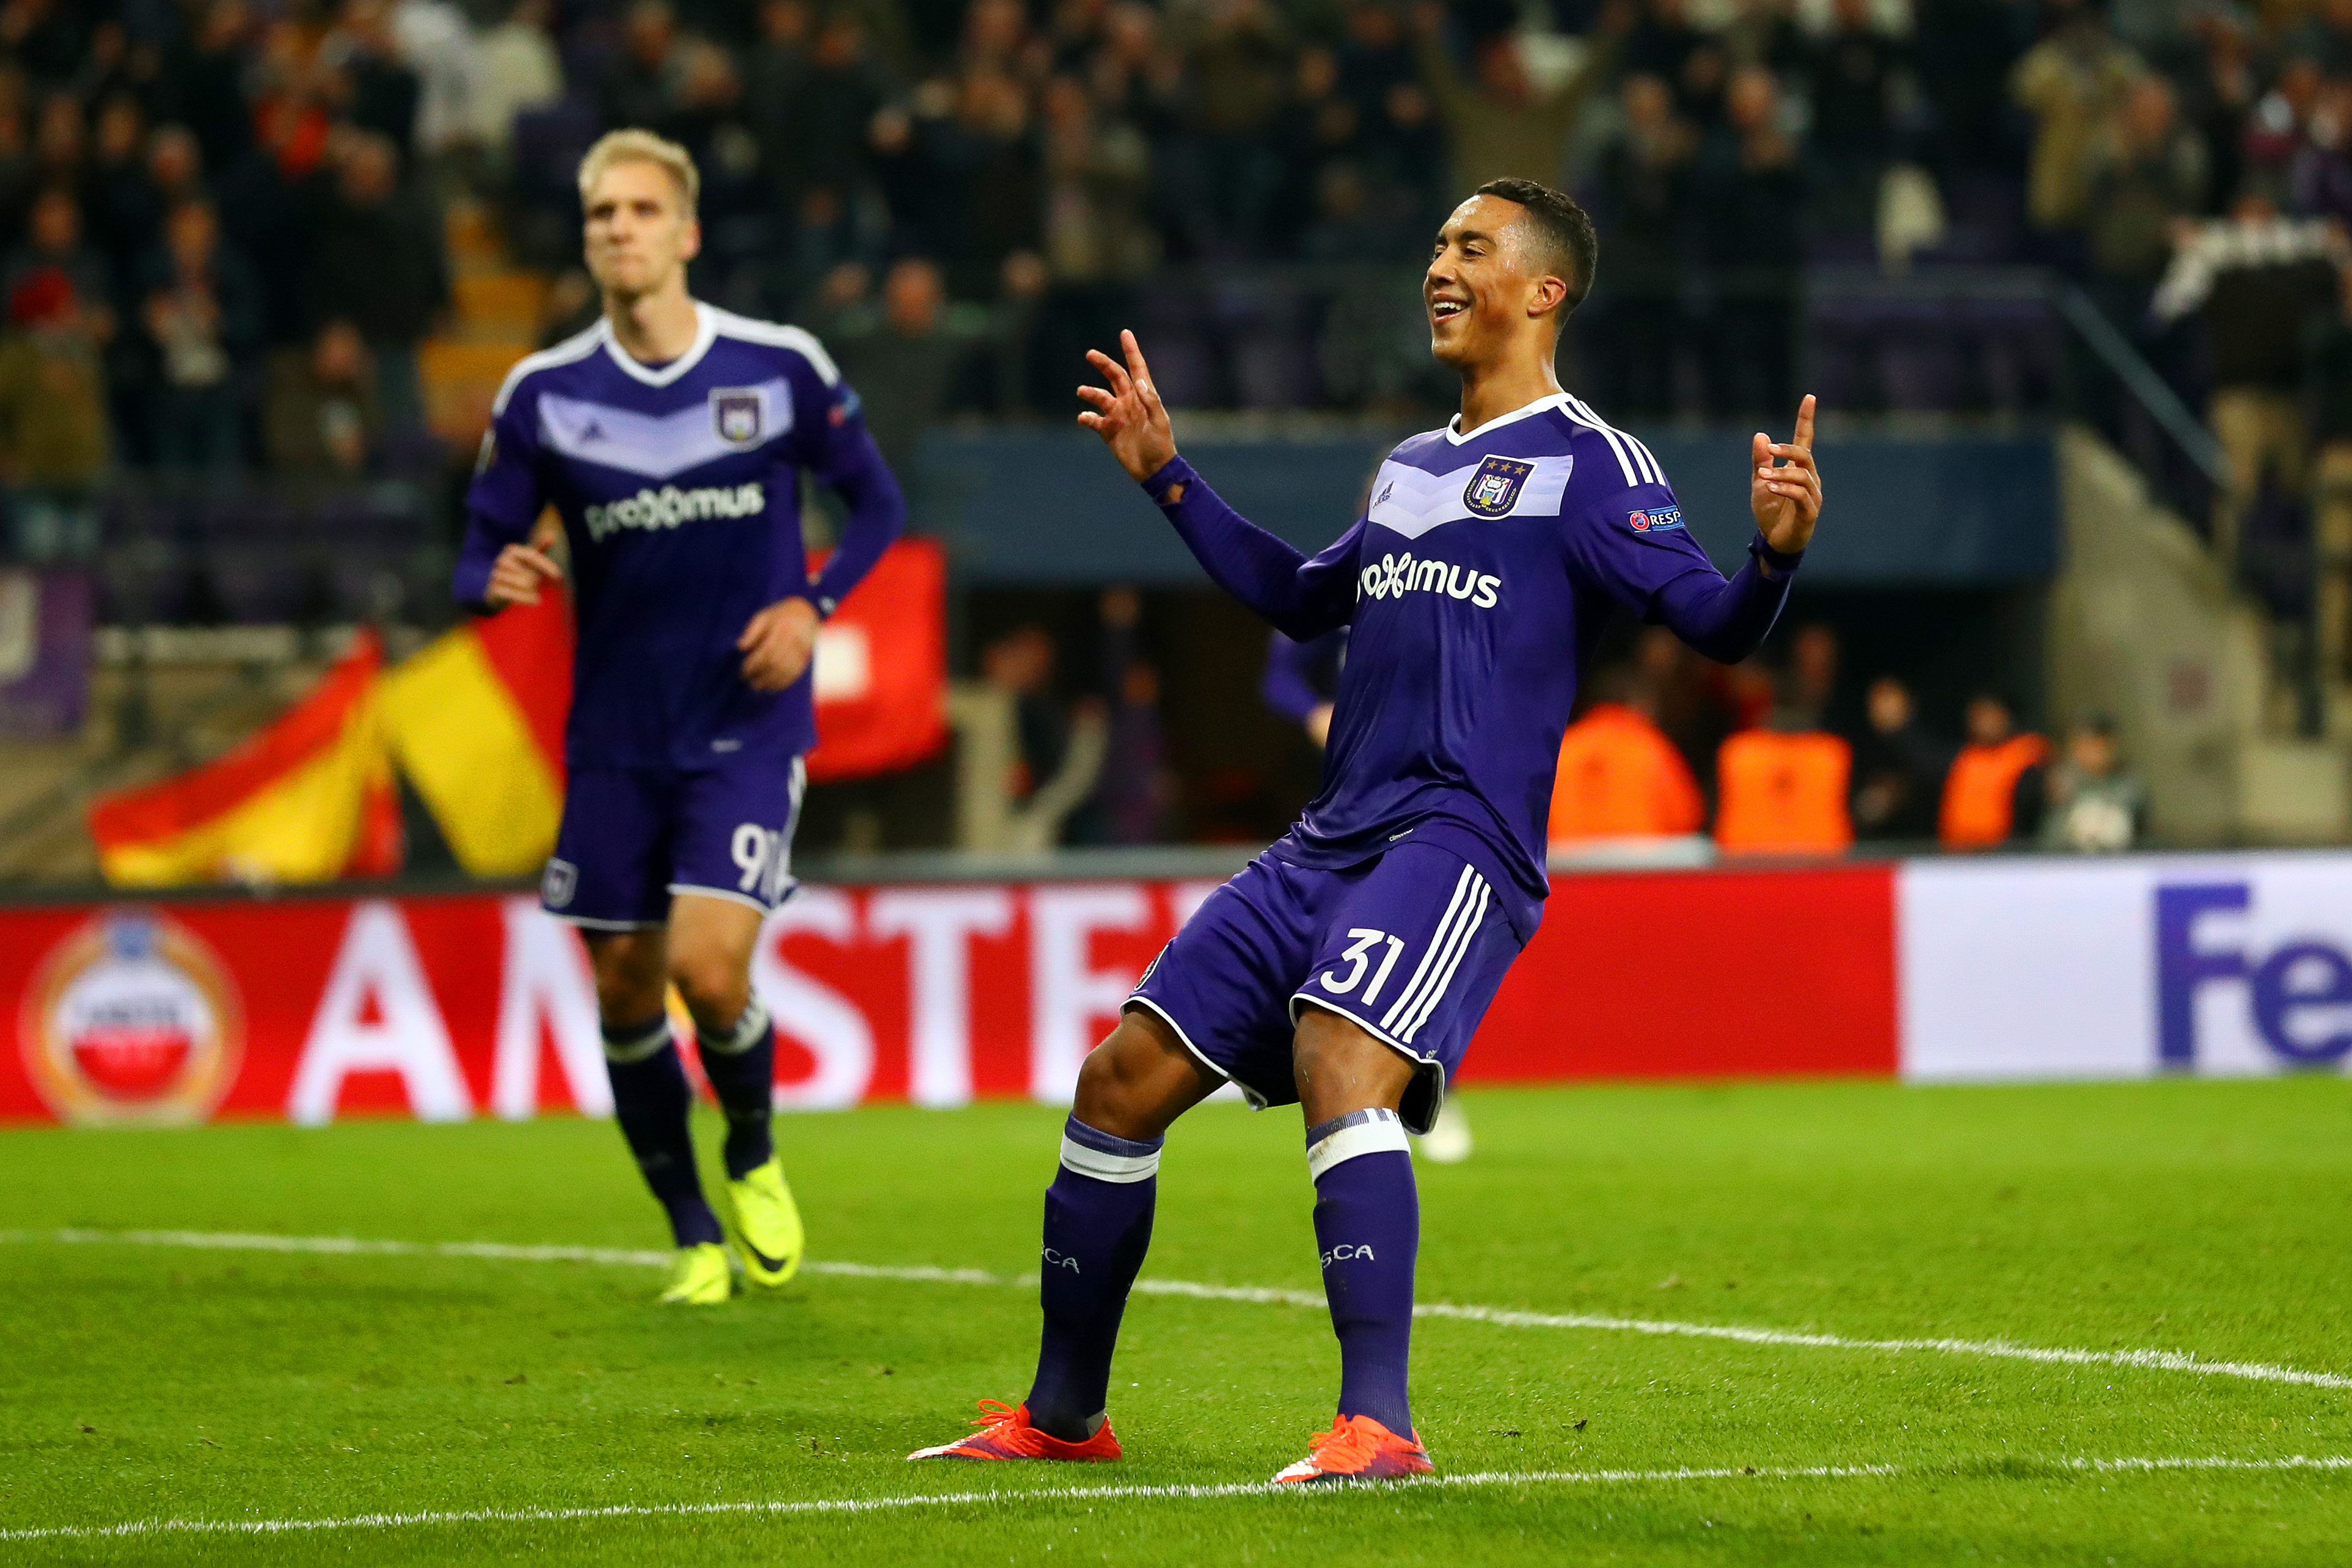 BRUSSELS, BELGIUM - NOVEMBER 03:  Youri Tielemans of RSC Anderlecht celebrates after scoring his team's thirkd goal during the UEFA Europa League Group C match between RSC Anderlecht and 1. FSV Mainz 05 at Constant Vanden Stock Stadium on November 3, 2016 in Brussels, Belgium.  (Photo by Dean Mouhtaropoulos/Getty Images)